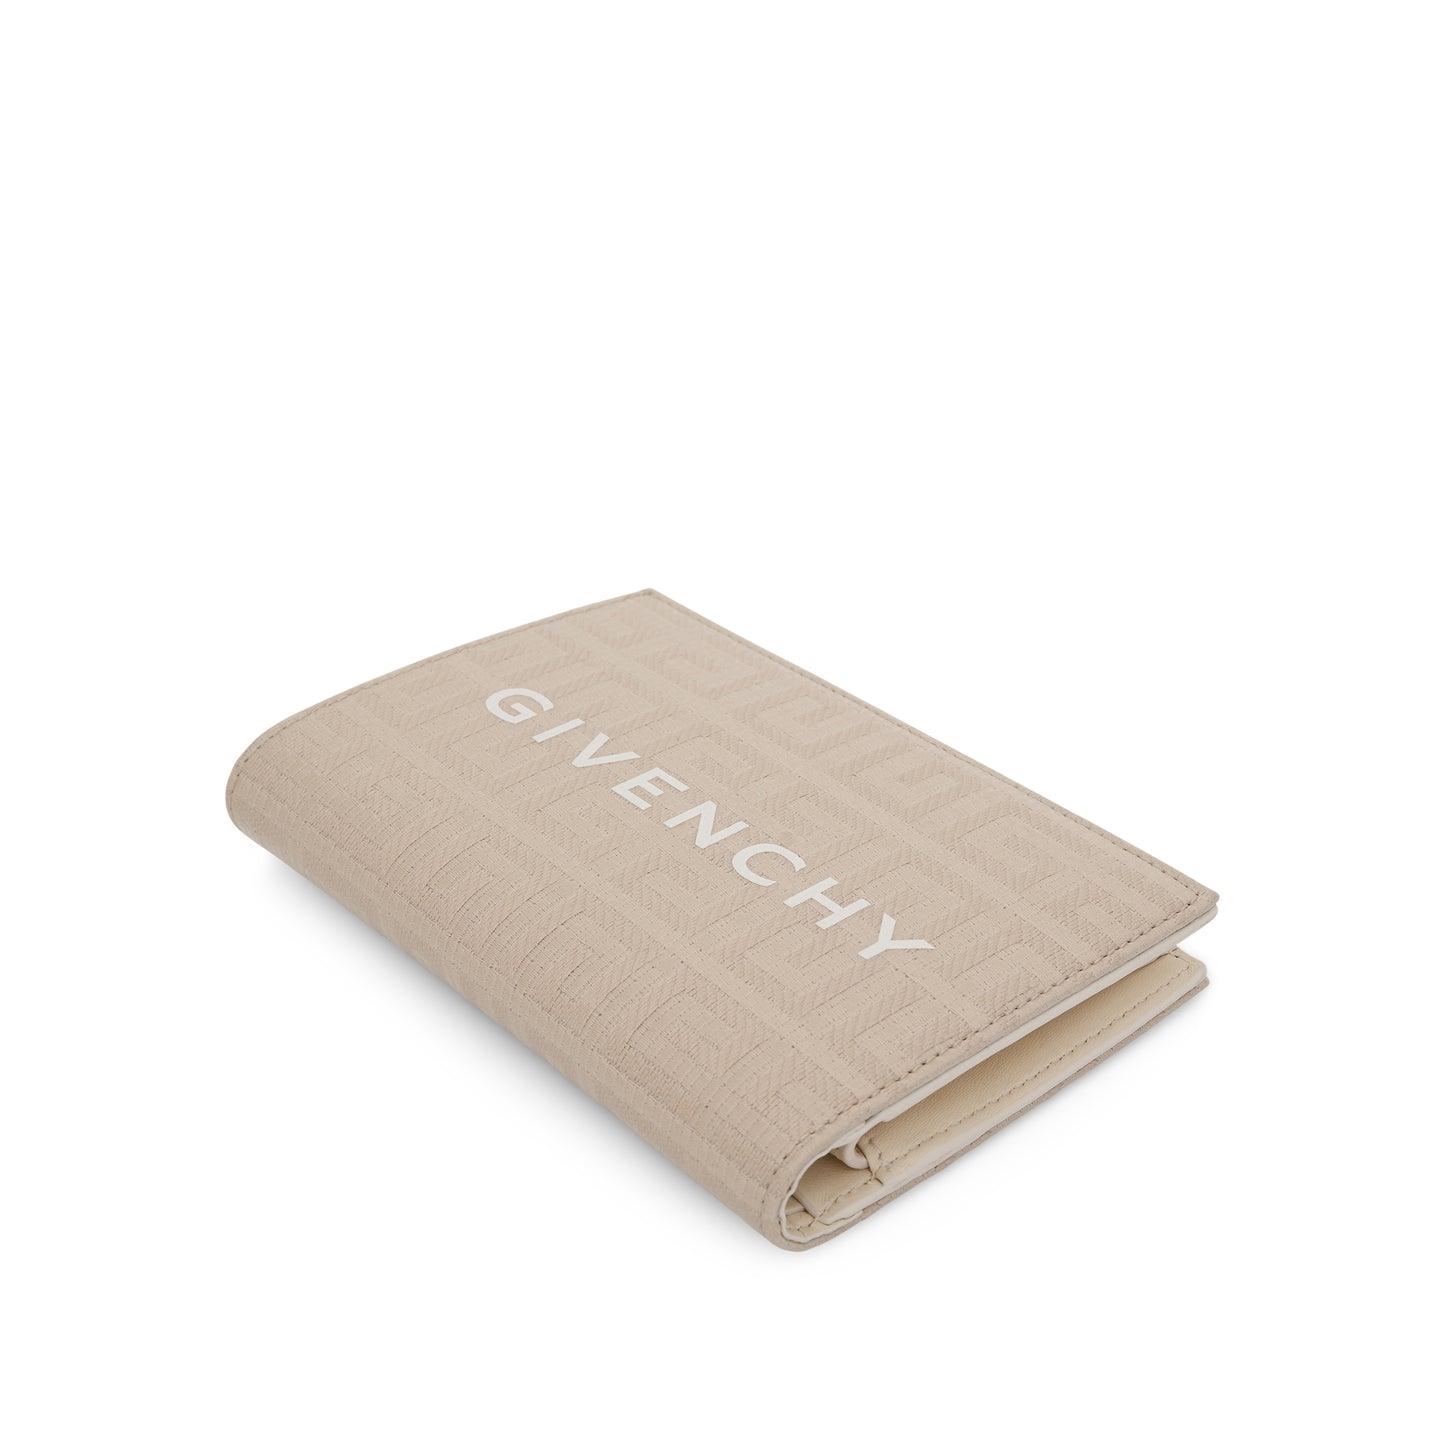 G Cut Bifold Wallet in 4G Coated Canvas in Natural Beige